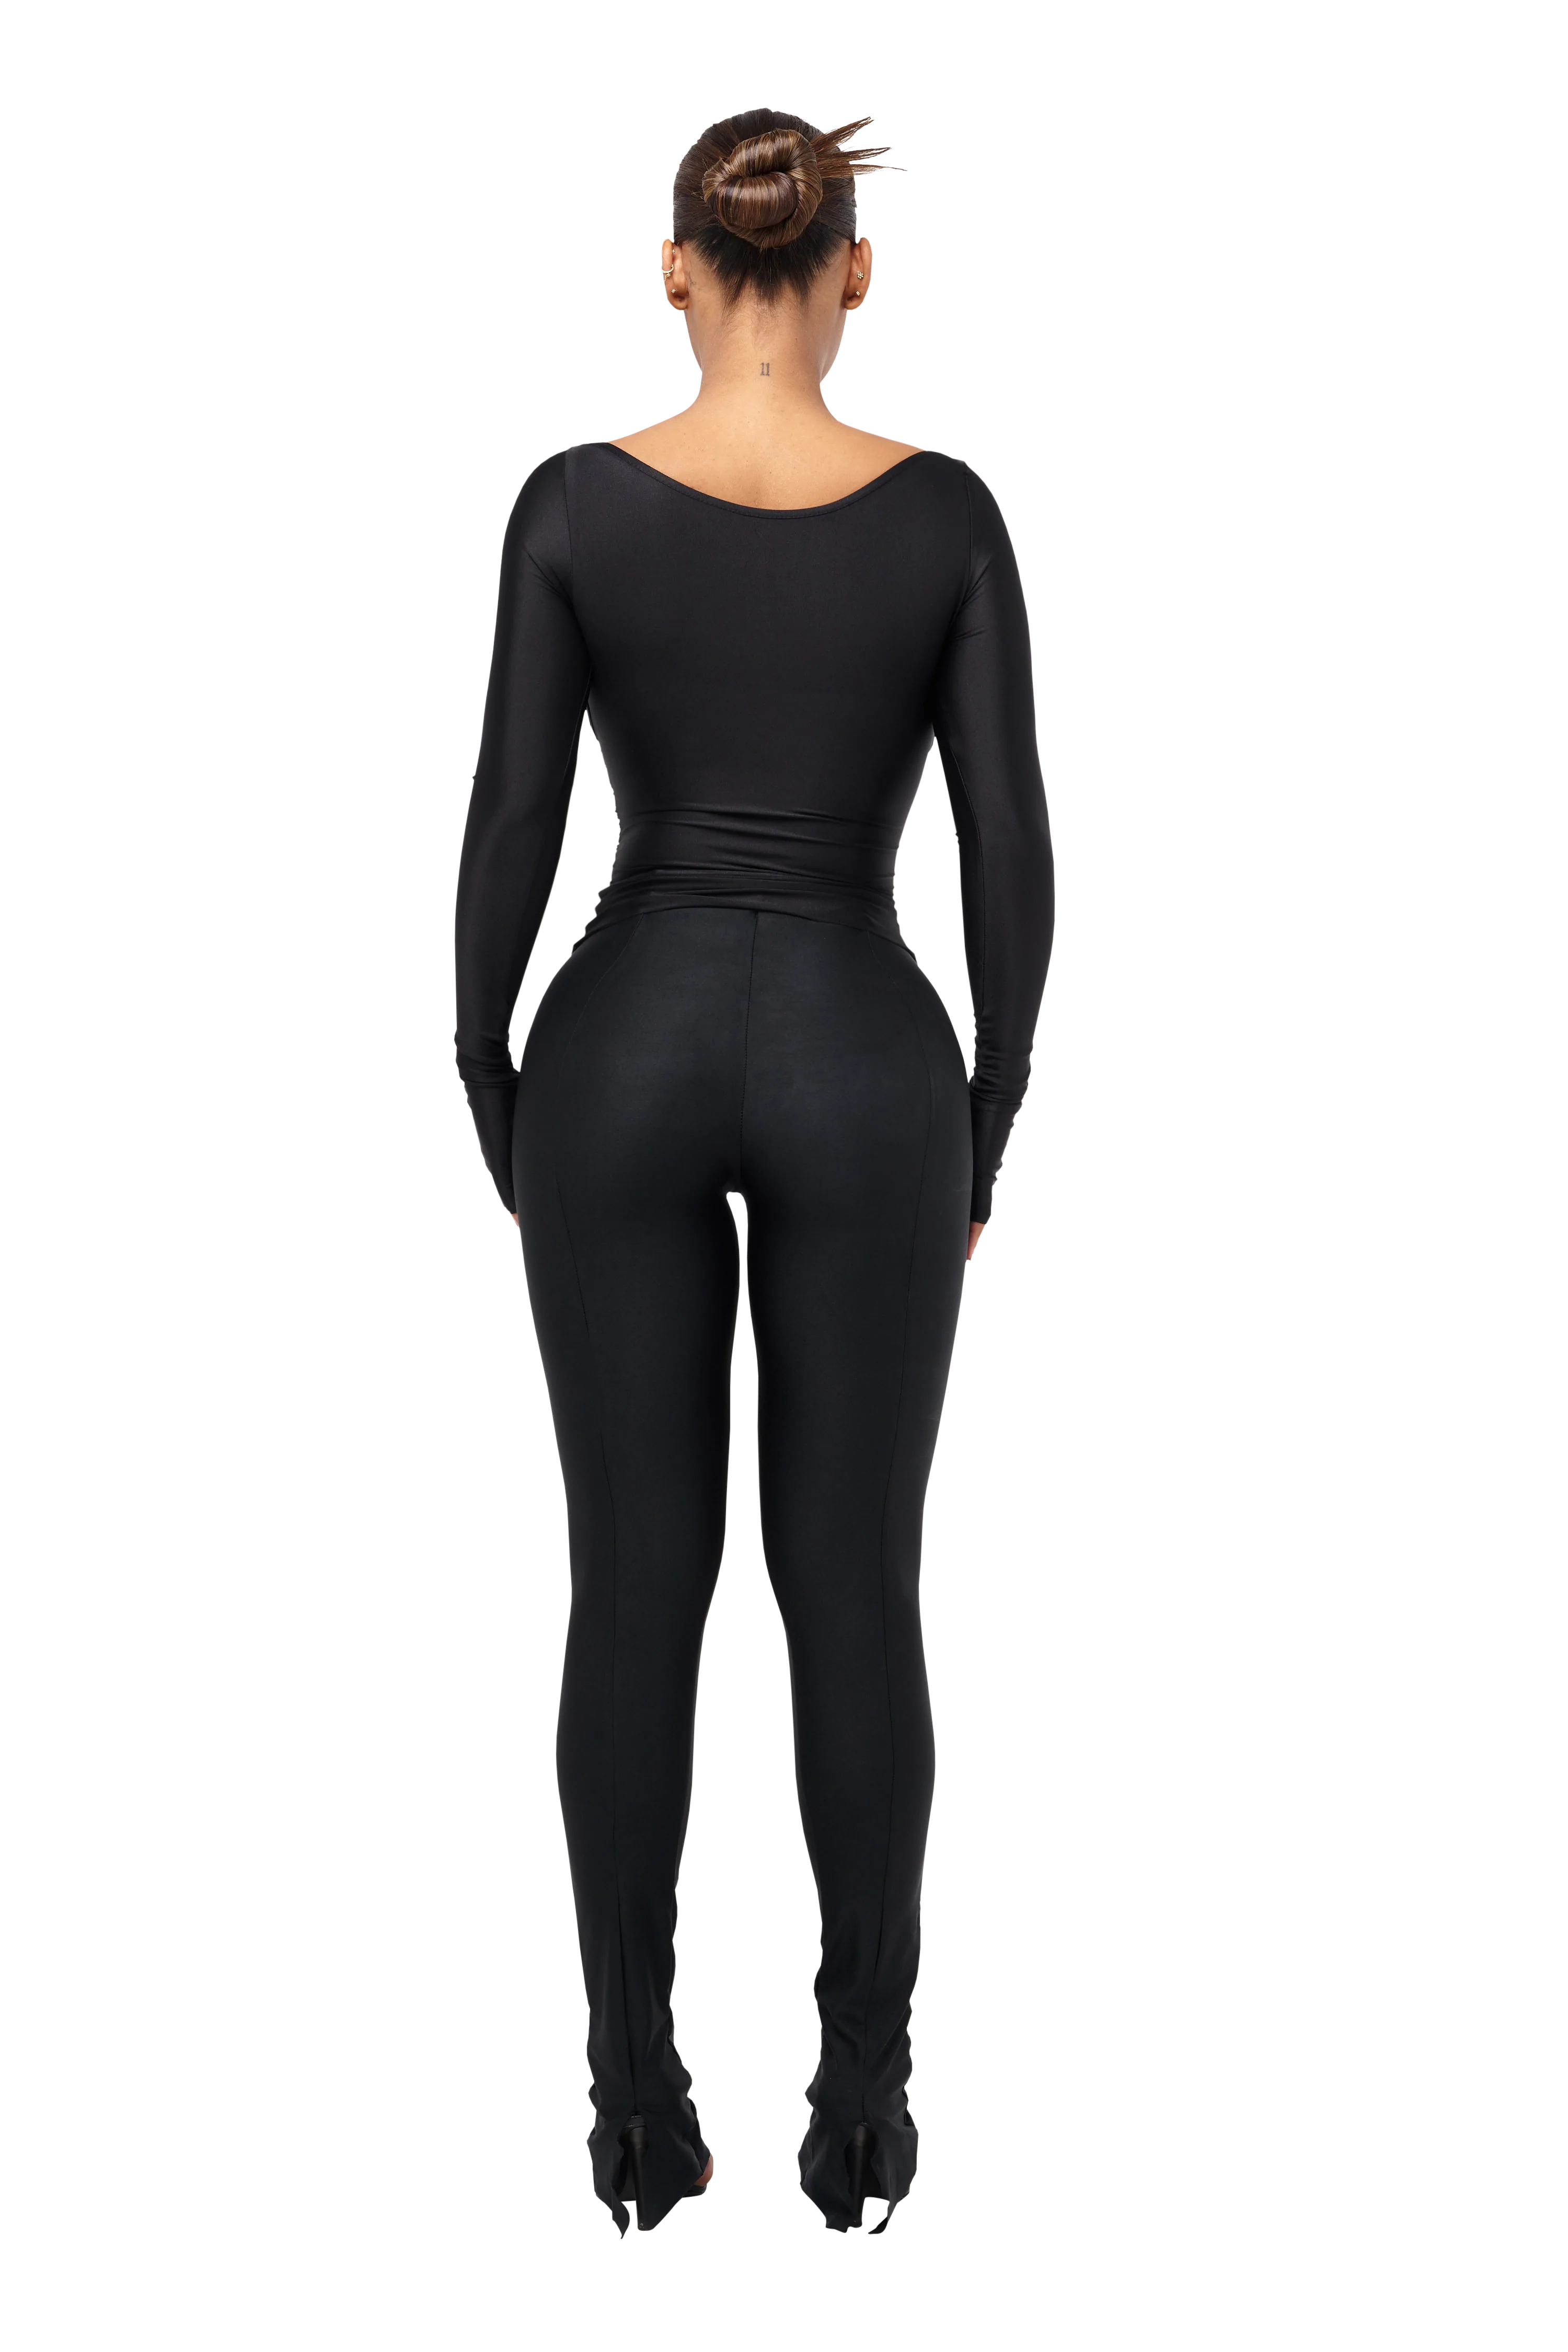 Coucoo - Lanai Long-Sleeved Top and Leggings in Squid Ink • Curated By KT